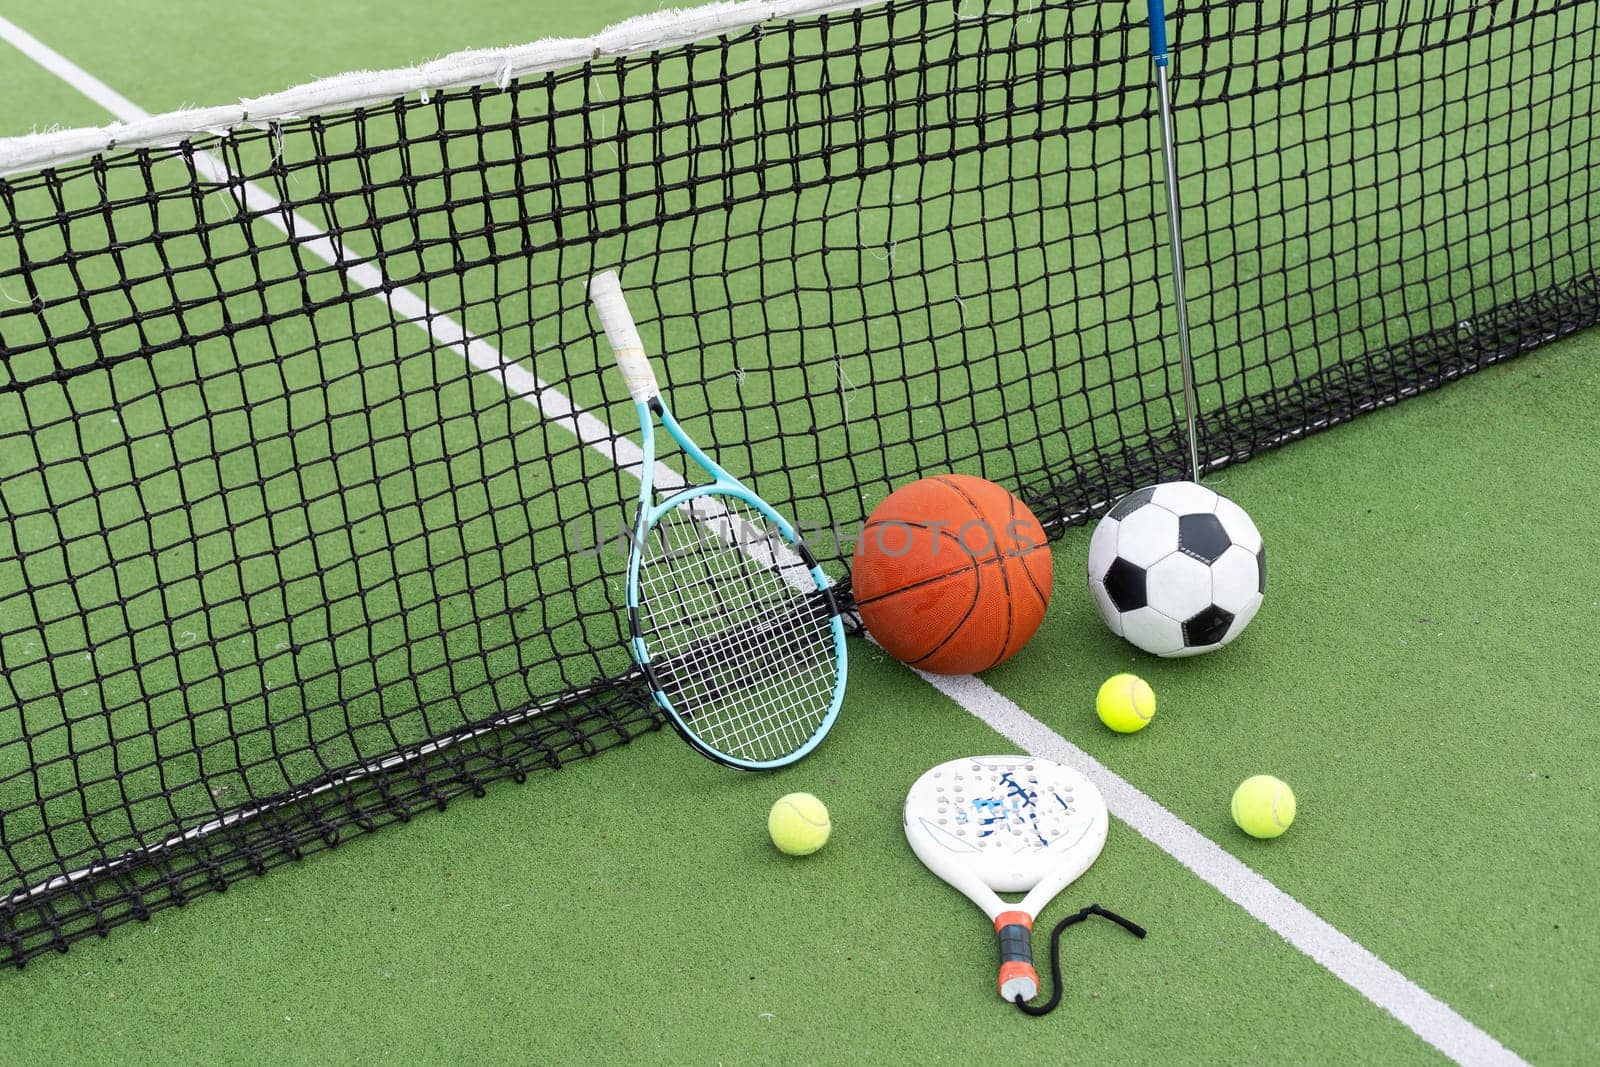 A variety of sports equipment including an american football, a soccer ball, a tennis racket, a tennis ball, and a basketball by Andelov13